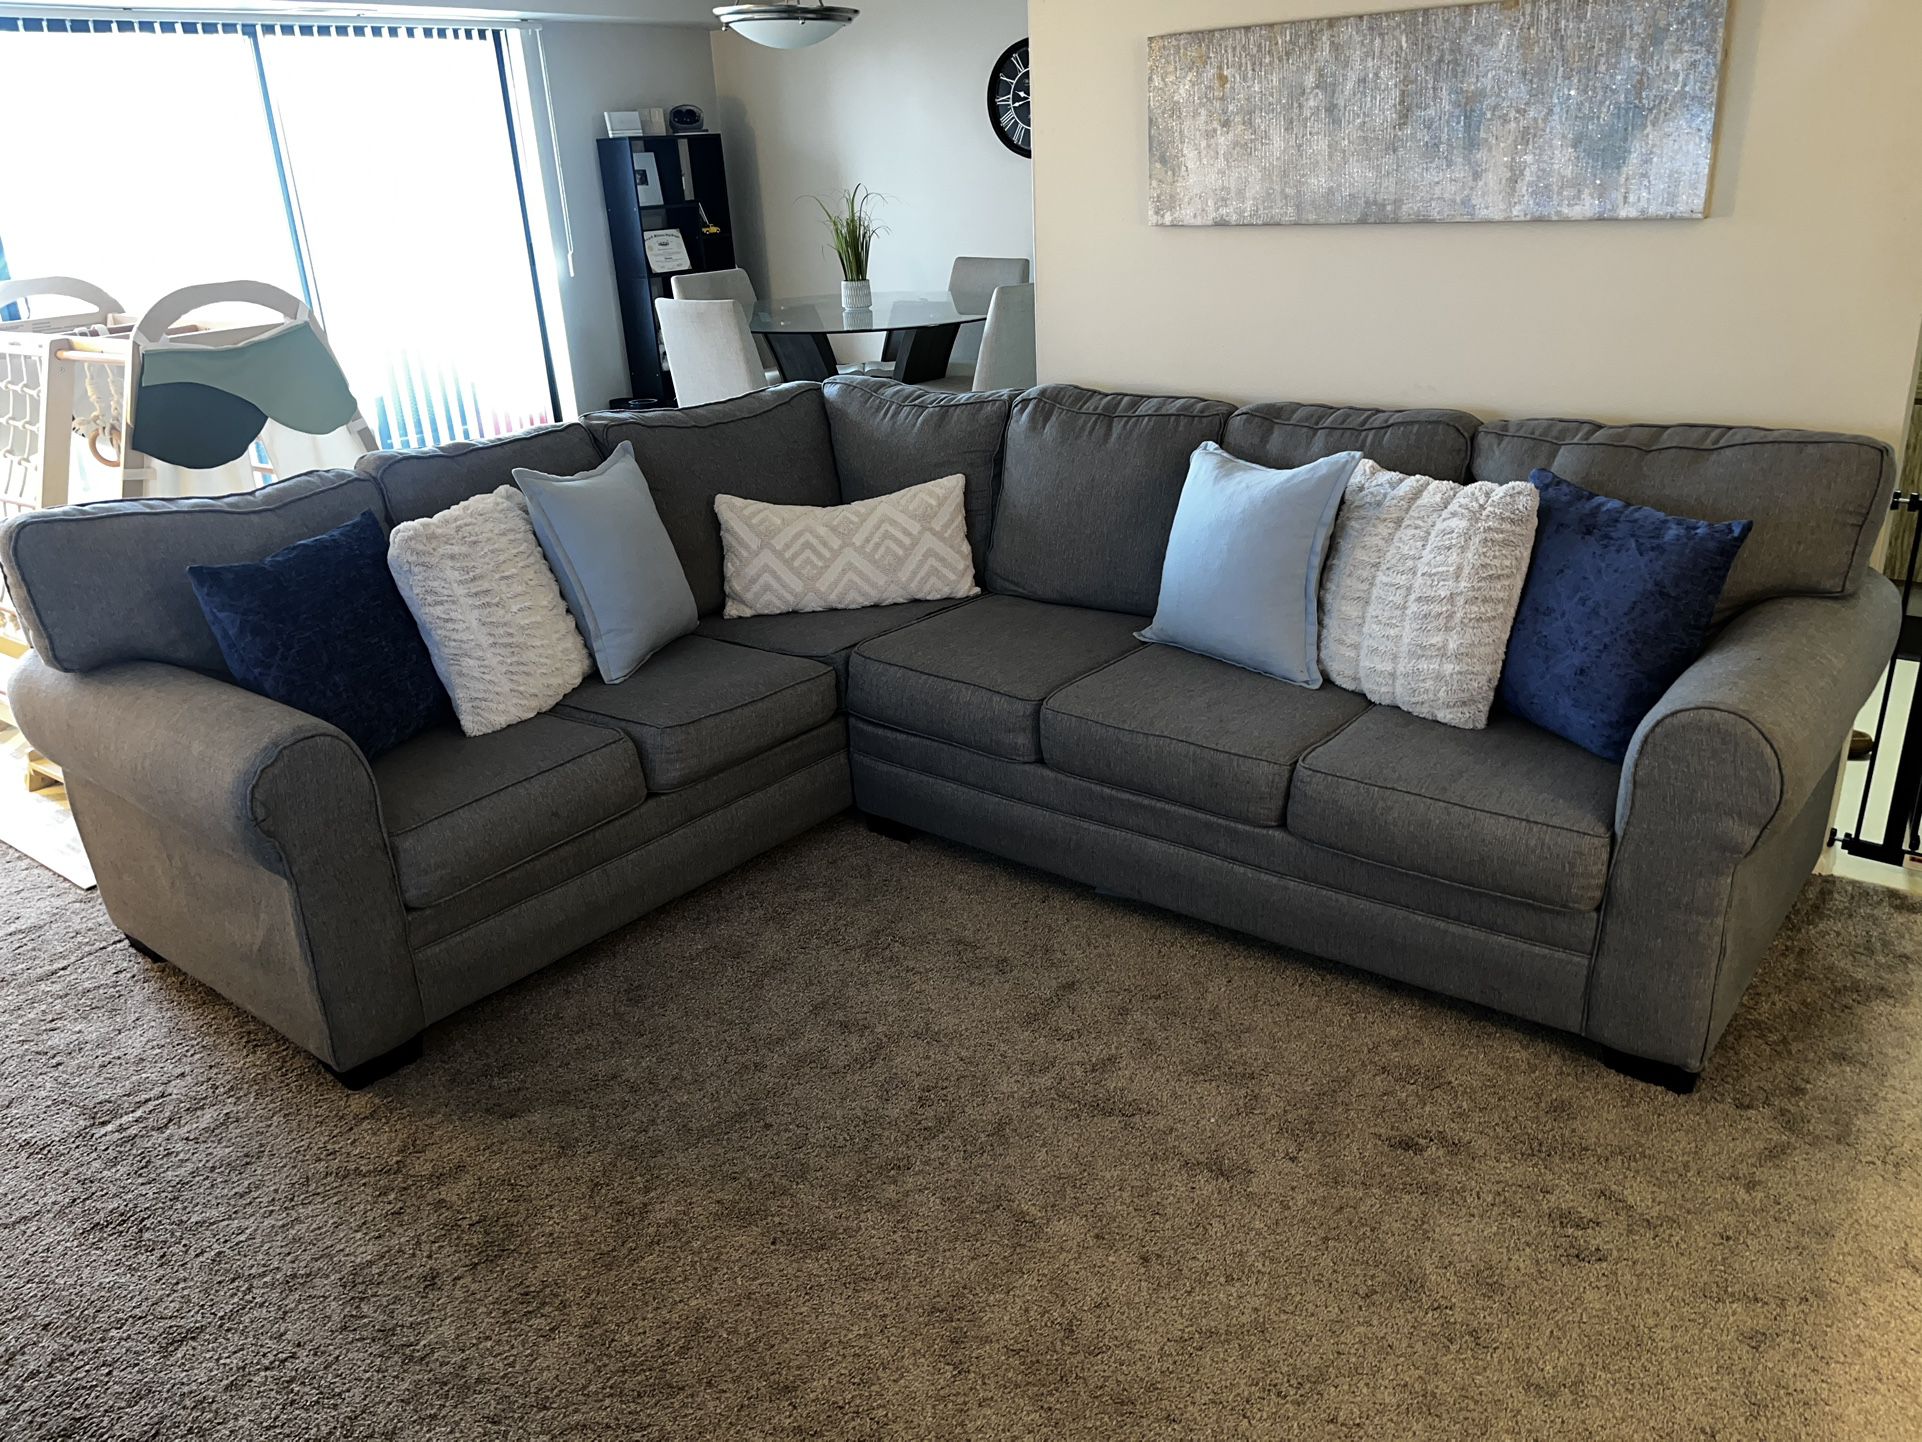 Grey Sectional Couches 